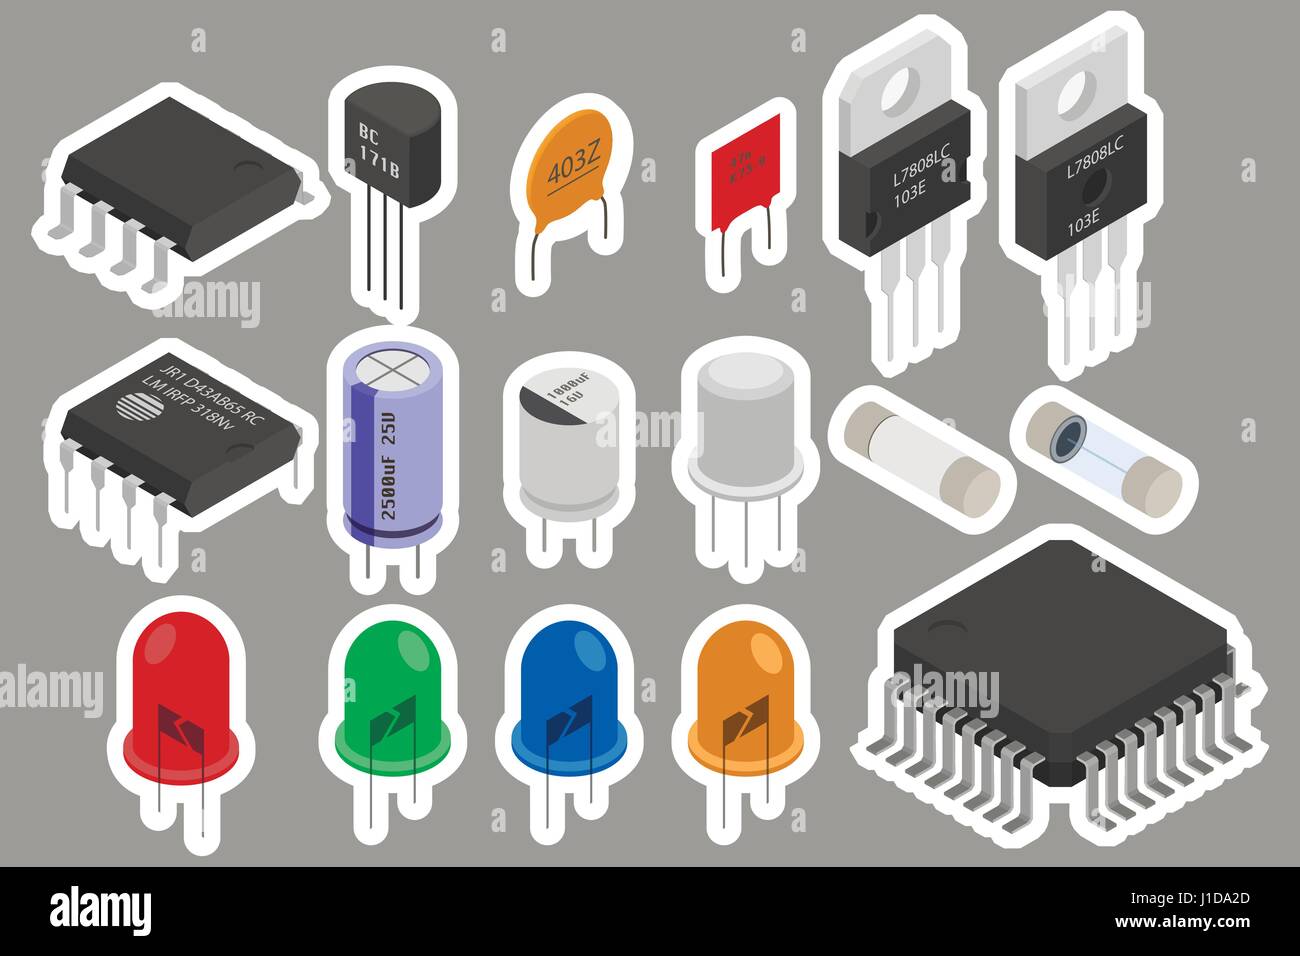 Electronic components stickers Stock Vector